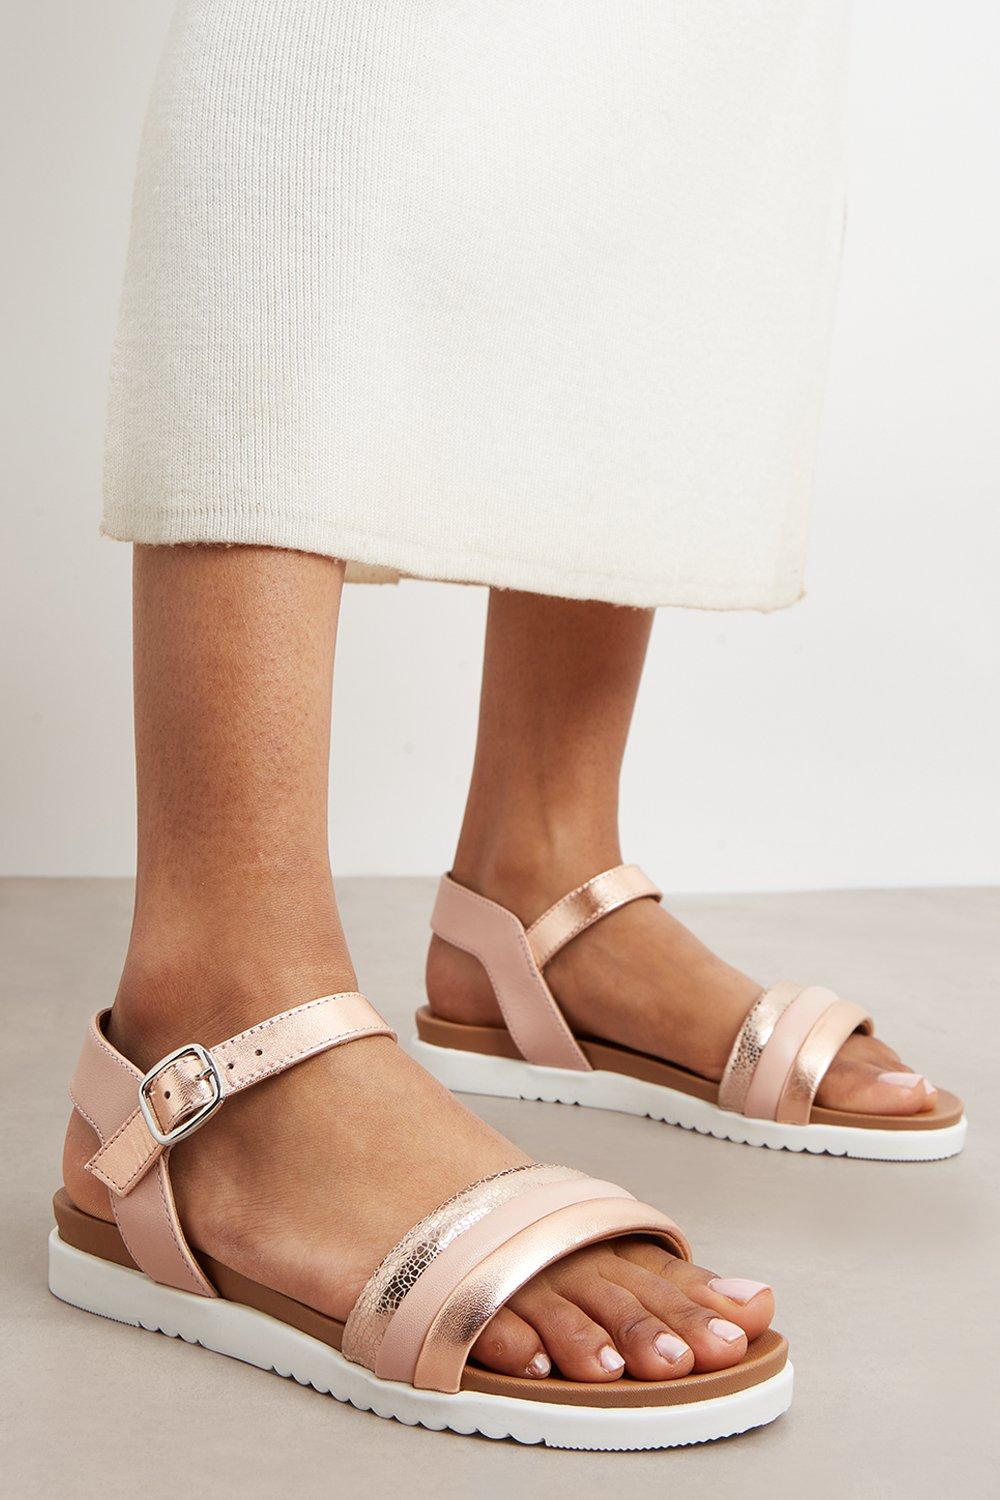 Women’s Good For The Sole: Tina Leather Extra Wide Fit Flat Sandal - blush - 3